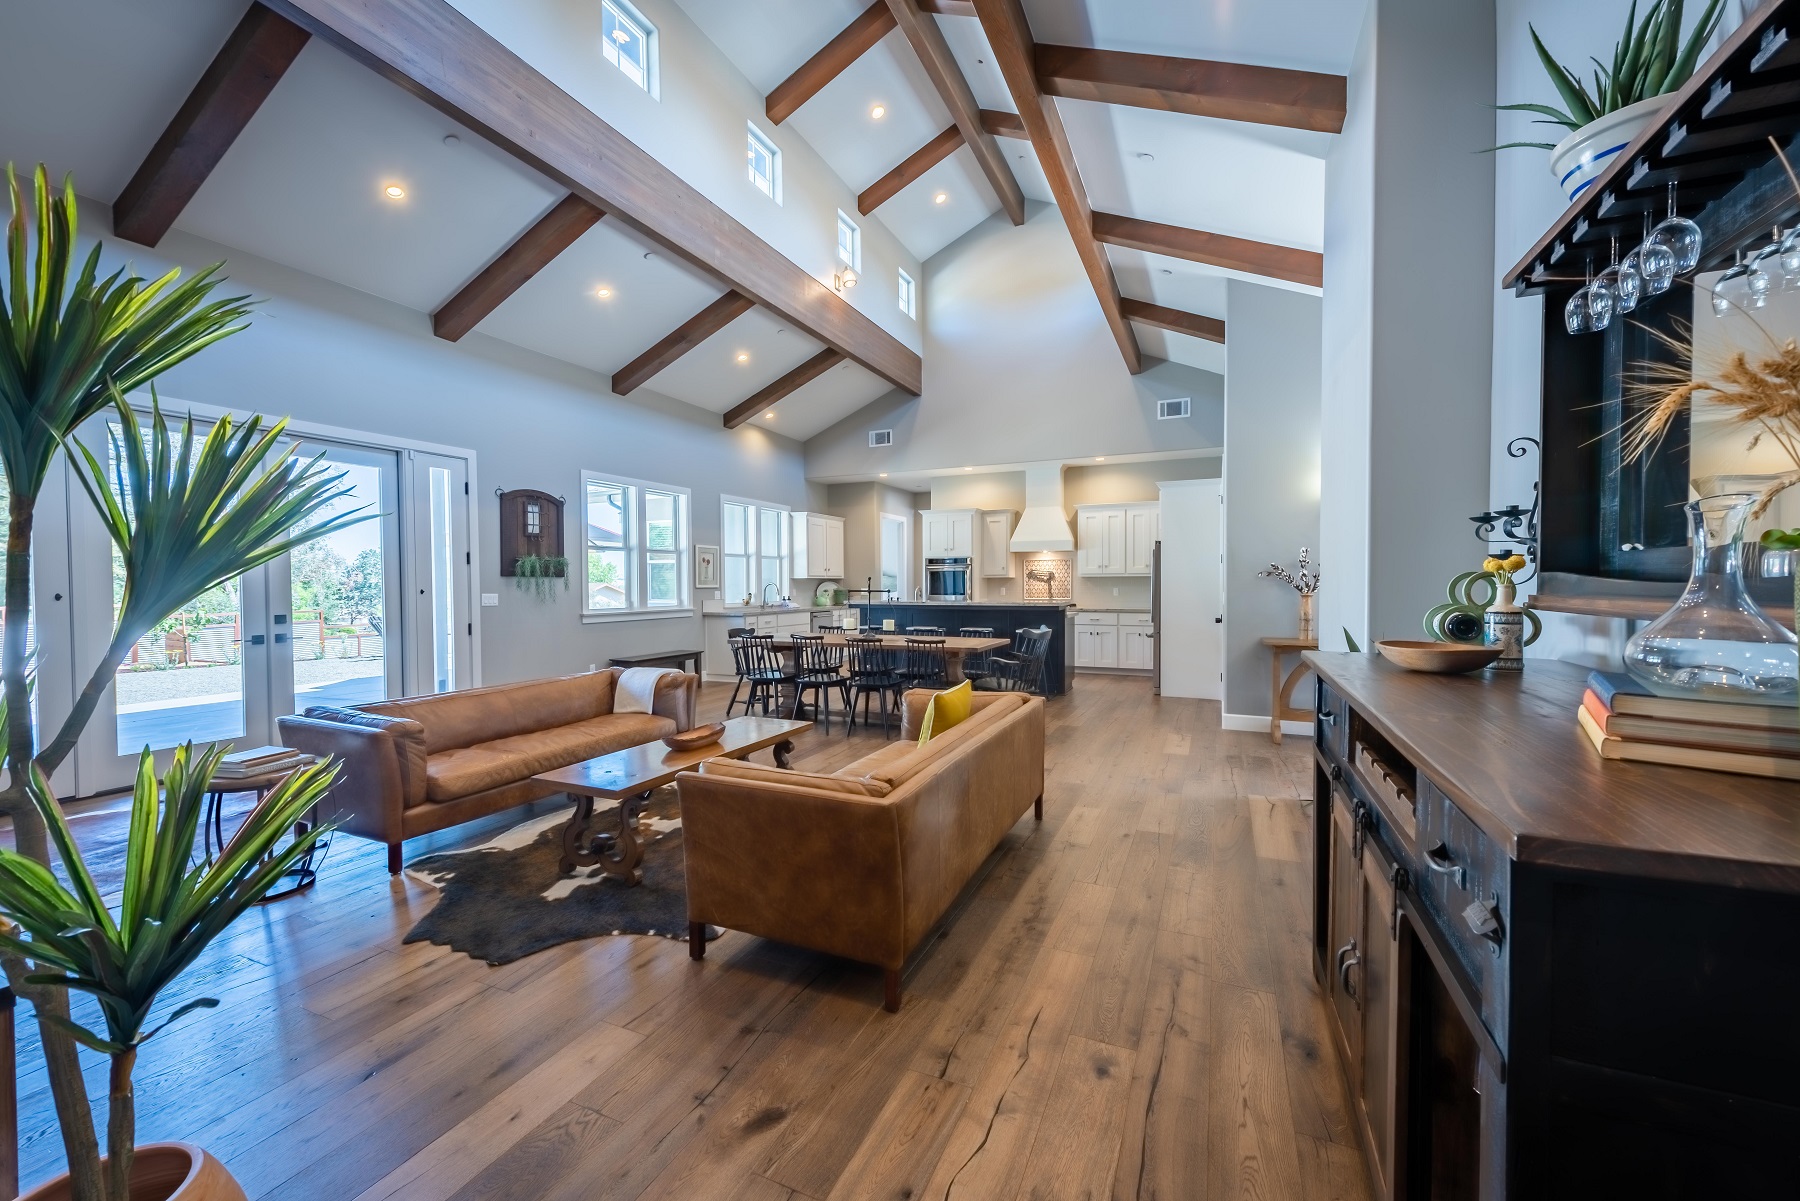 Grand great room with expansive 22 ft ceilings lined with wood beams